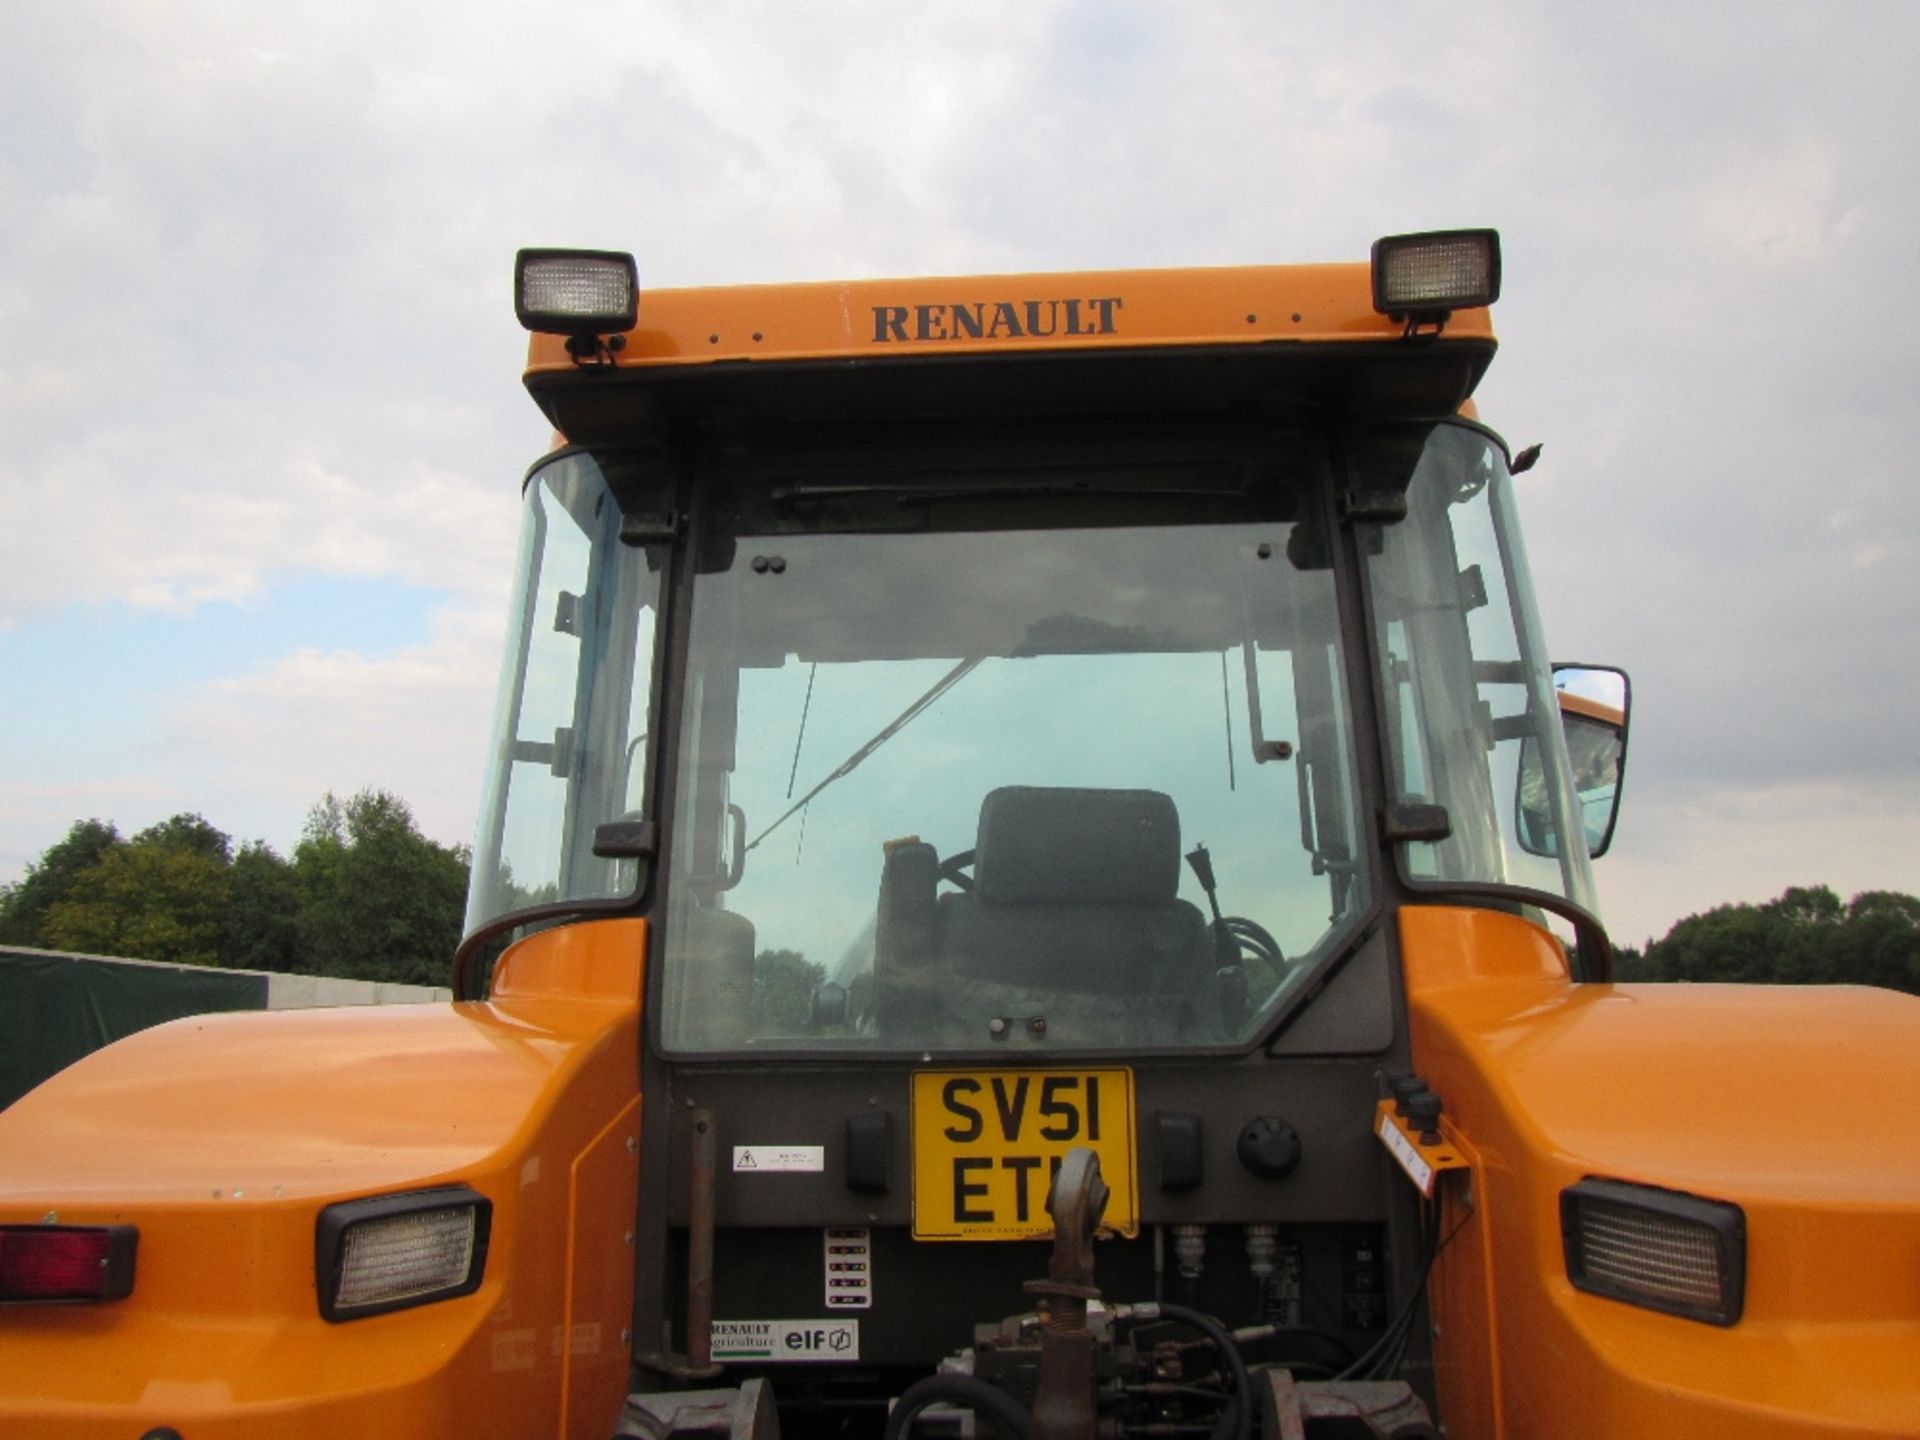 Renault Ares 815 RZ Tractor with Chilton MX120 Loader & Cab Suspension. Reg. No. SV51 ETL - Image 9 of 16